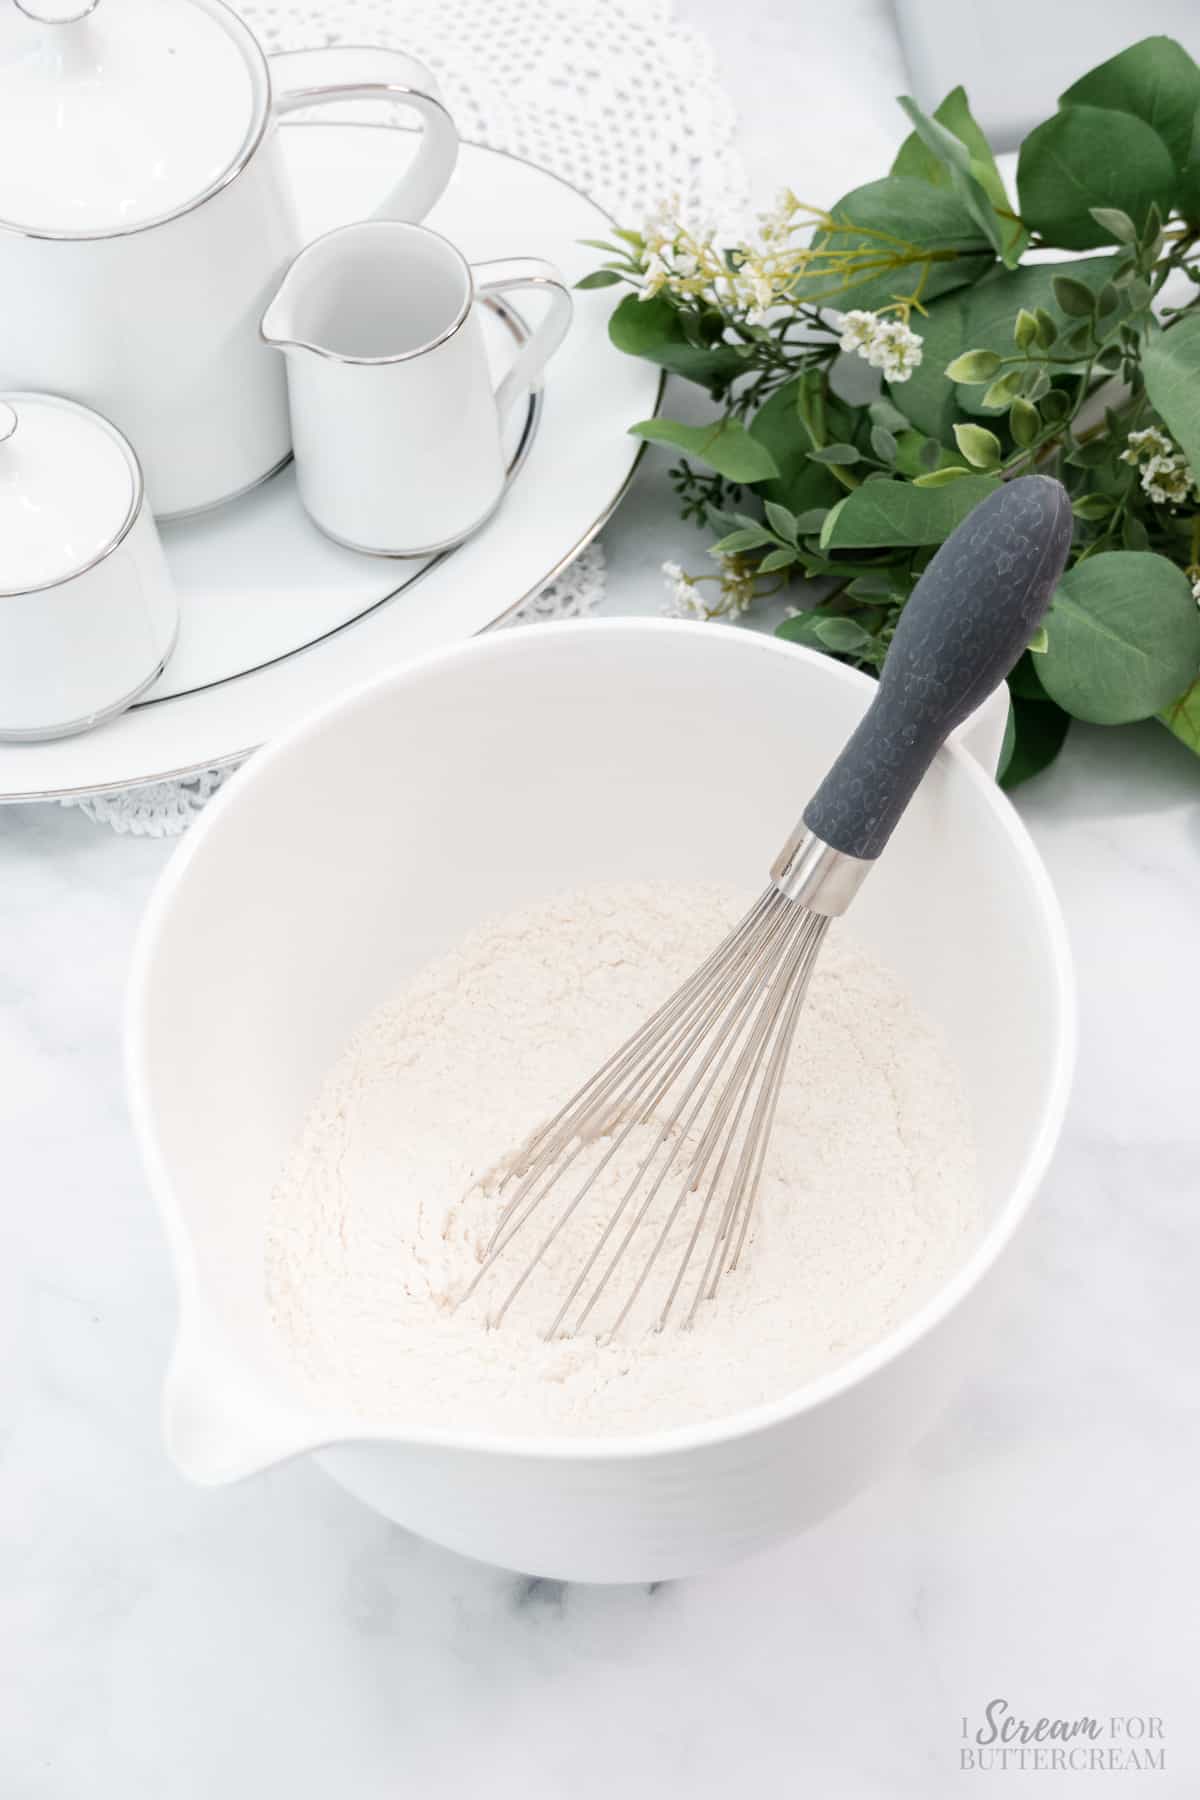 Mixing dry ingredients for pound cake in a white bowl.